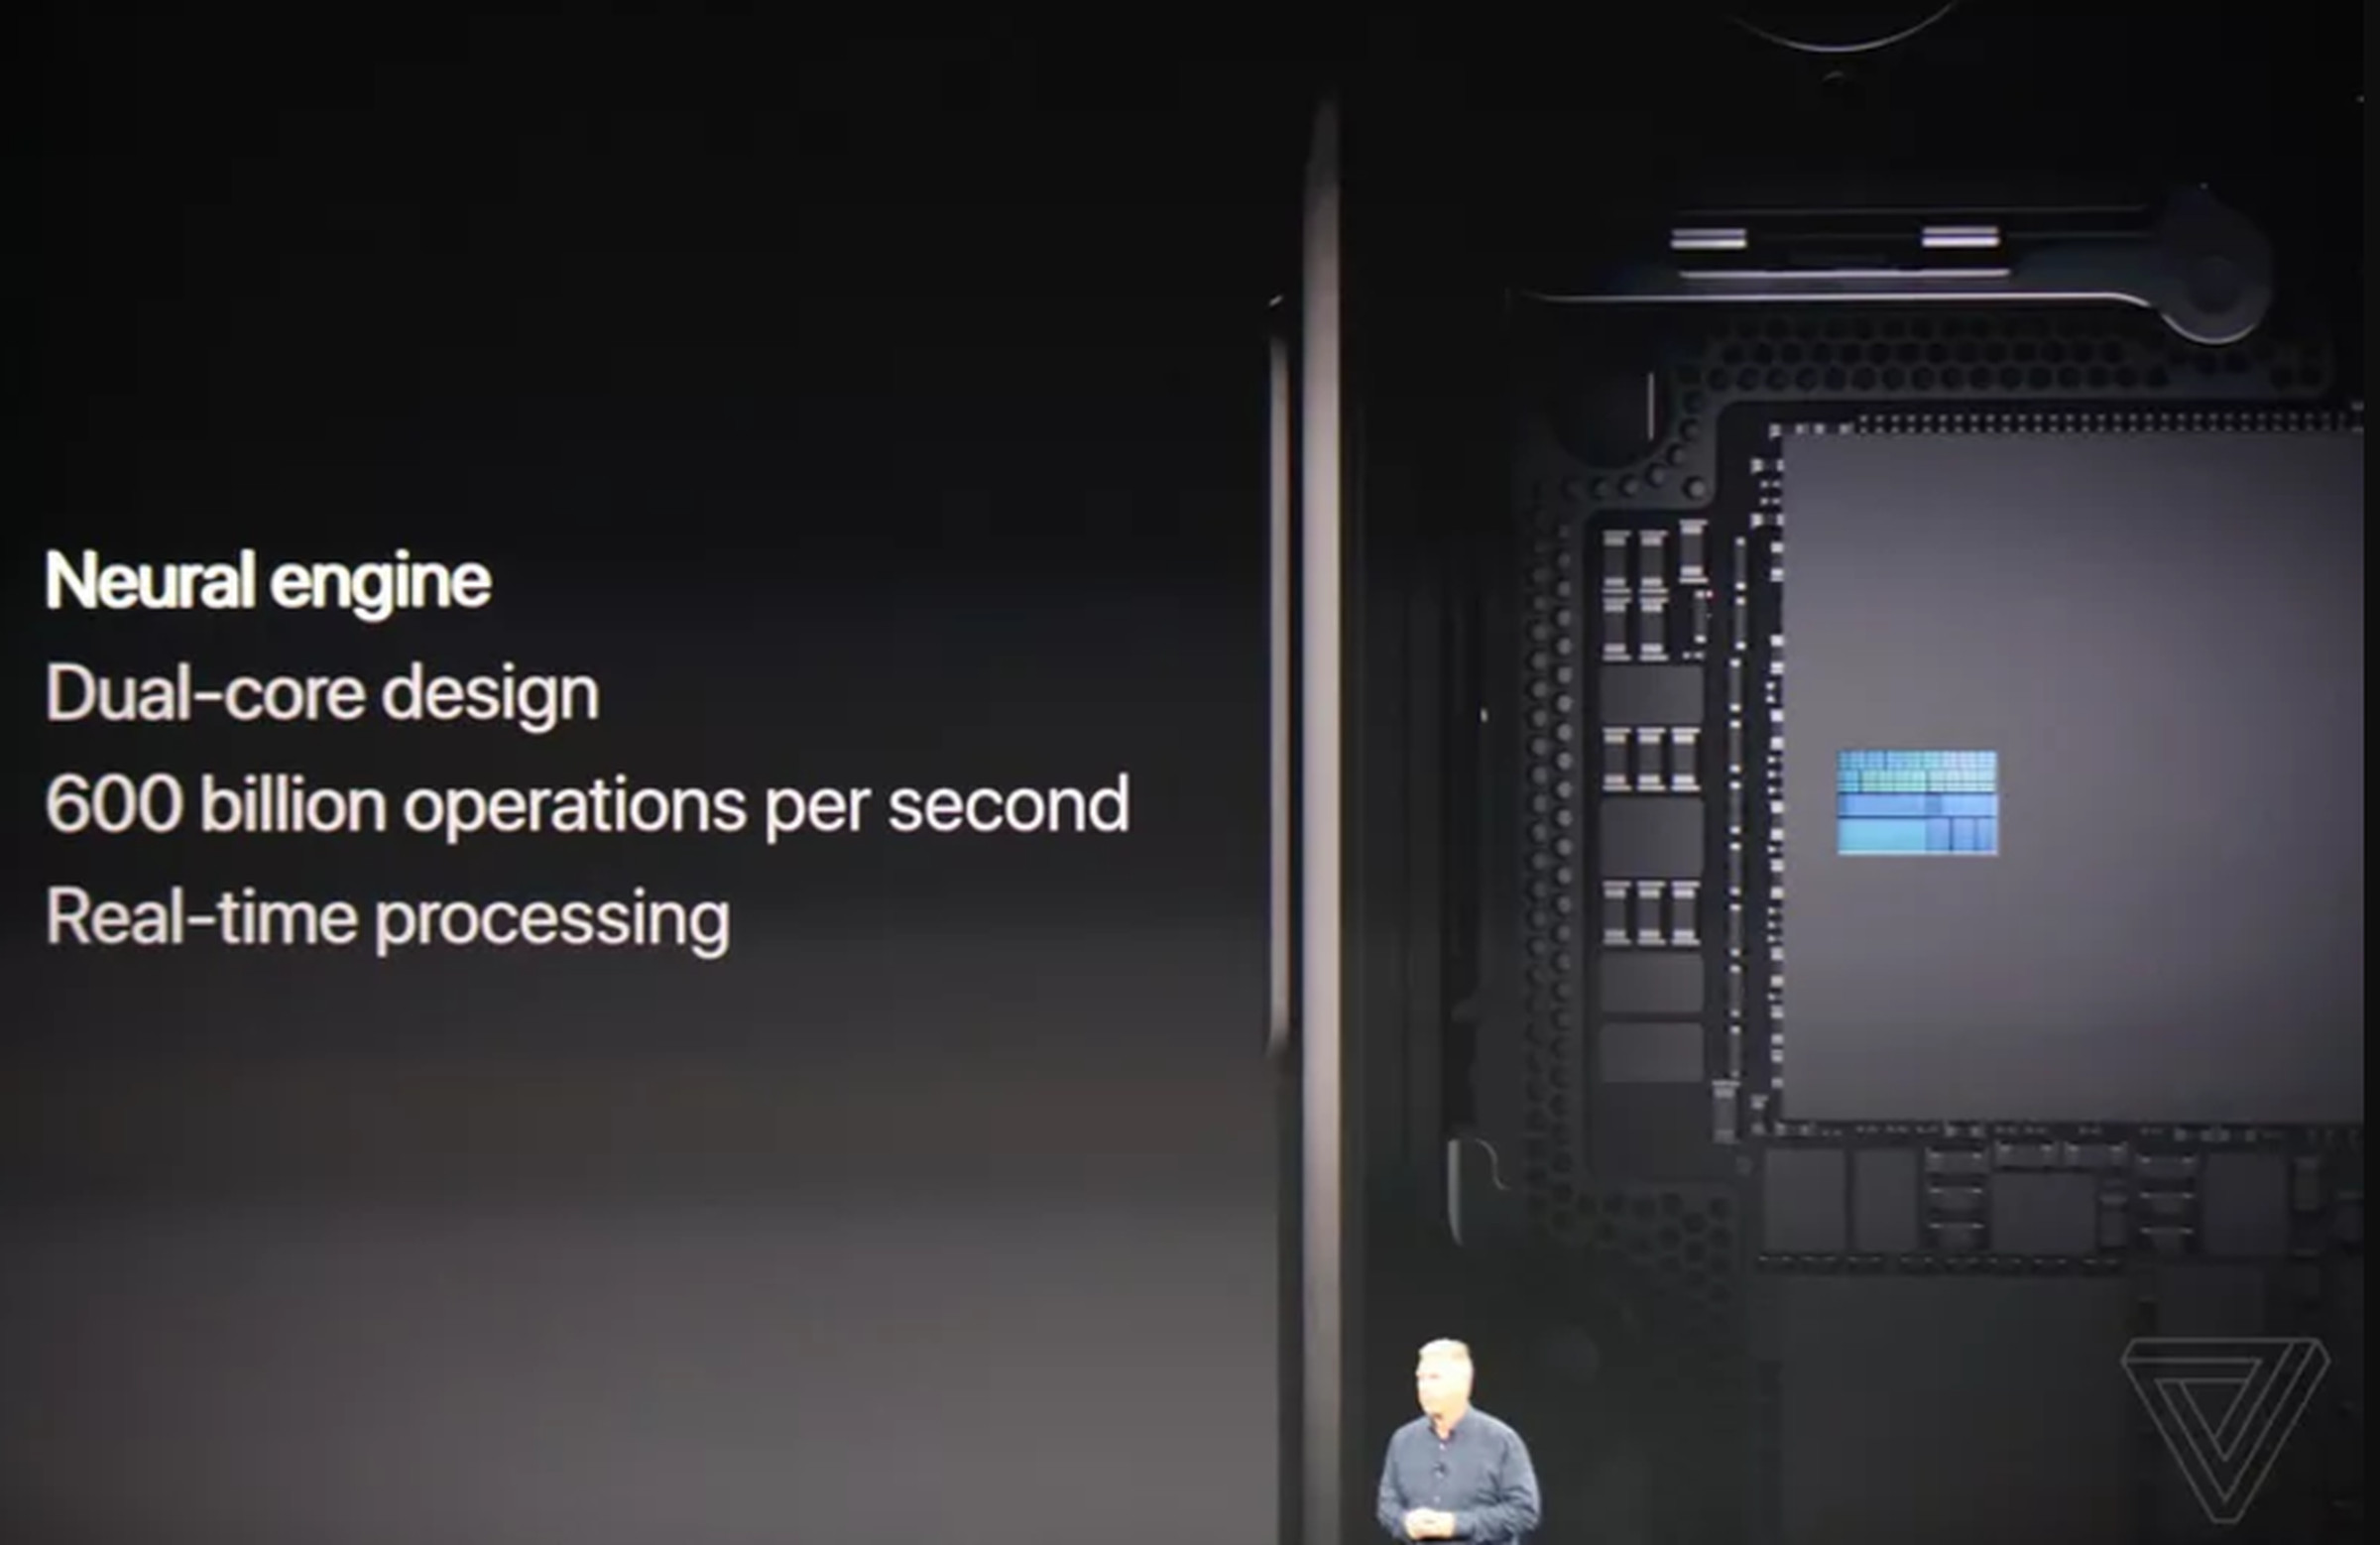 Apple unveils its new neural engine on stage at the iPhone X event. 